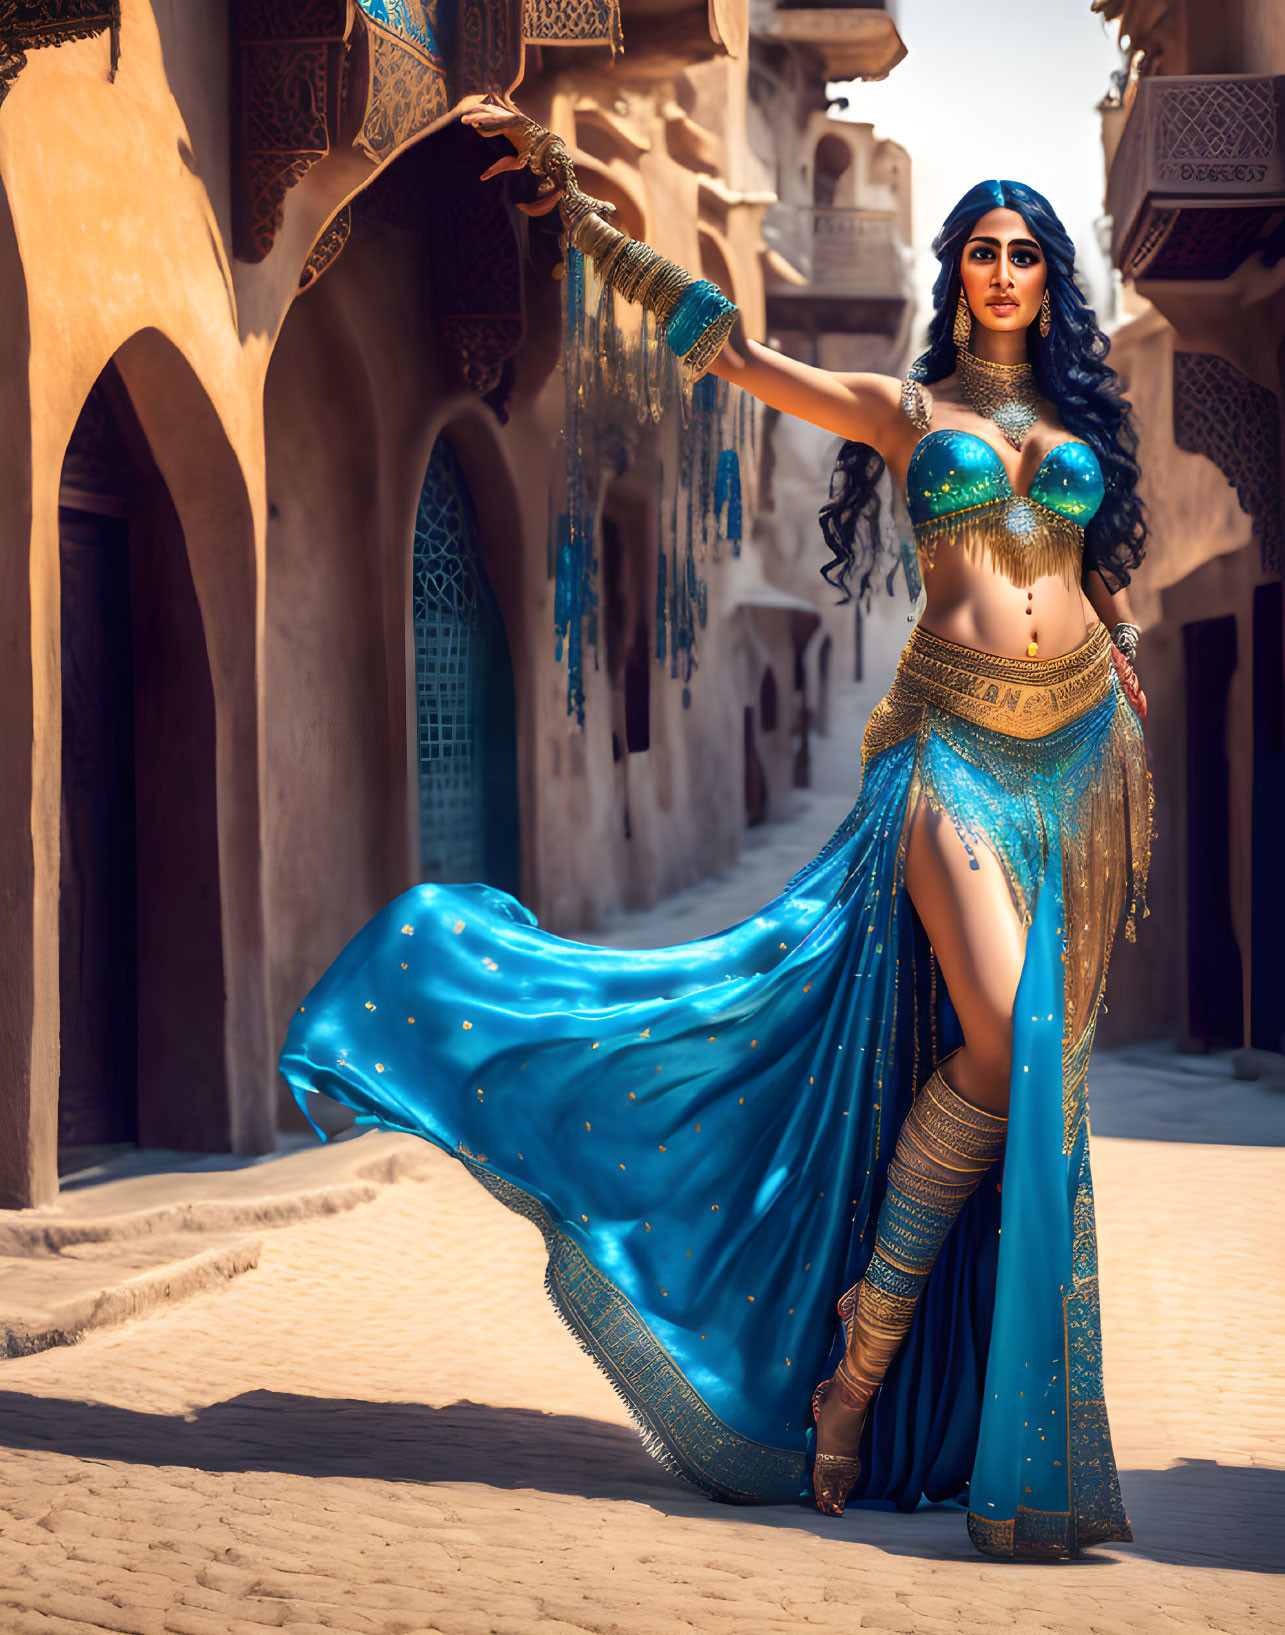 Woman in Luxurious Blue and Gold Belly Dance Costume in Sunlit Alley